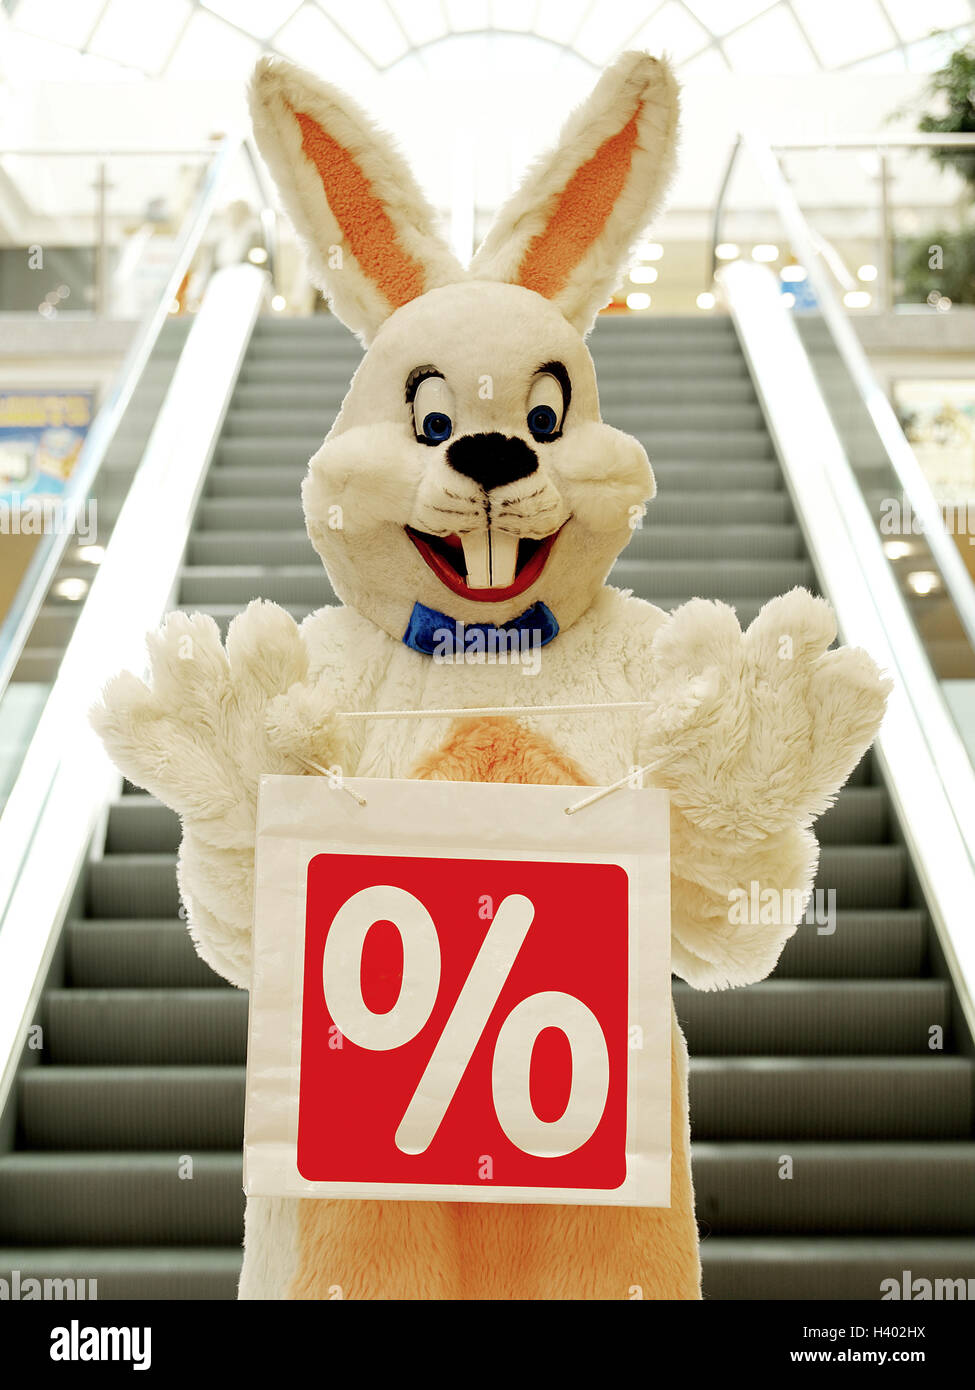 Department store, stairs, Easter bunny, carrier bag, label, percent sign Easter, Easter feast, child's faith, lining, panels, costume, hare's costume, hare, humor, fun, funnily, friendly, happy, joy, inside, purchasing, Easter purchasing, bargain purchase Stock Photo